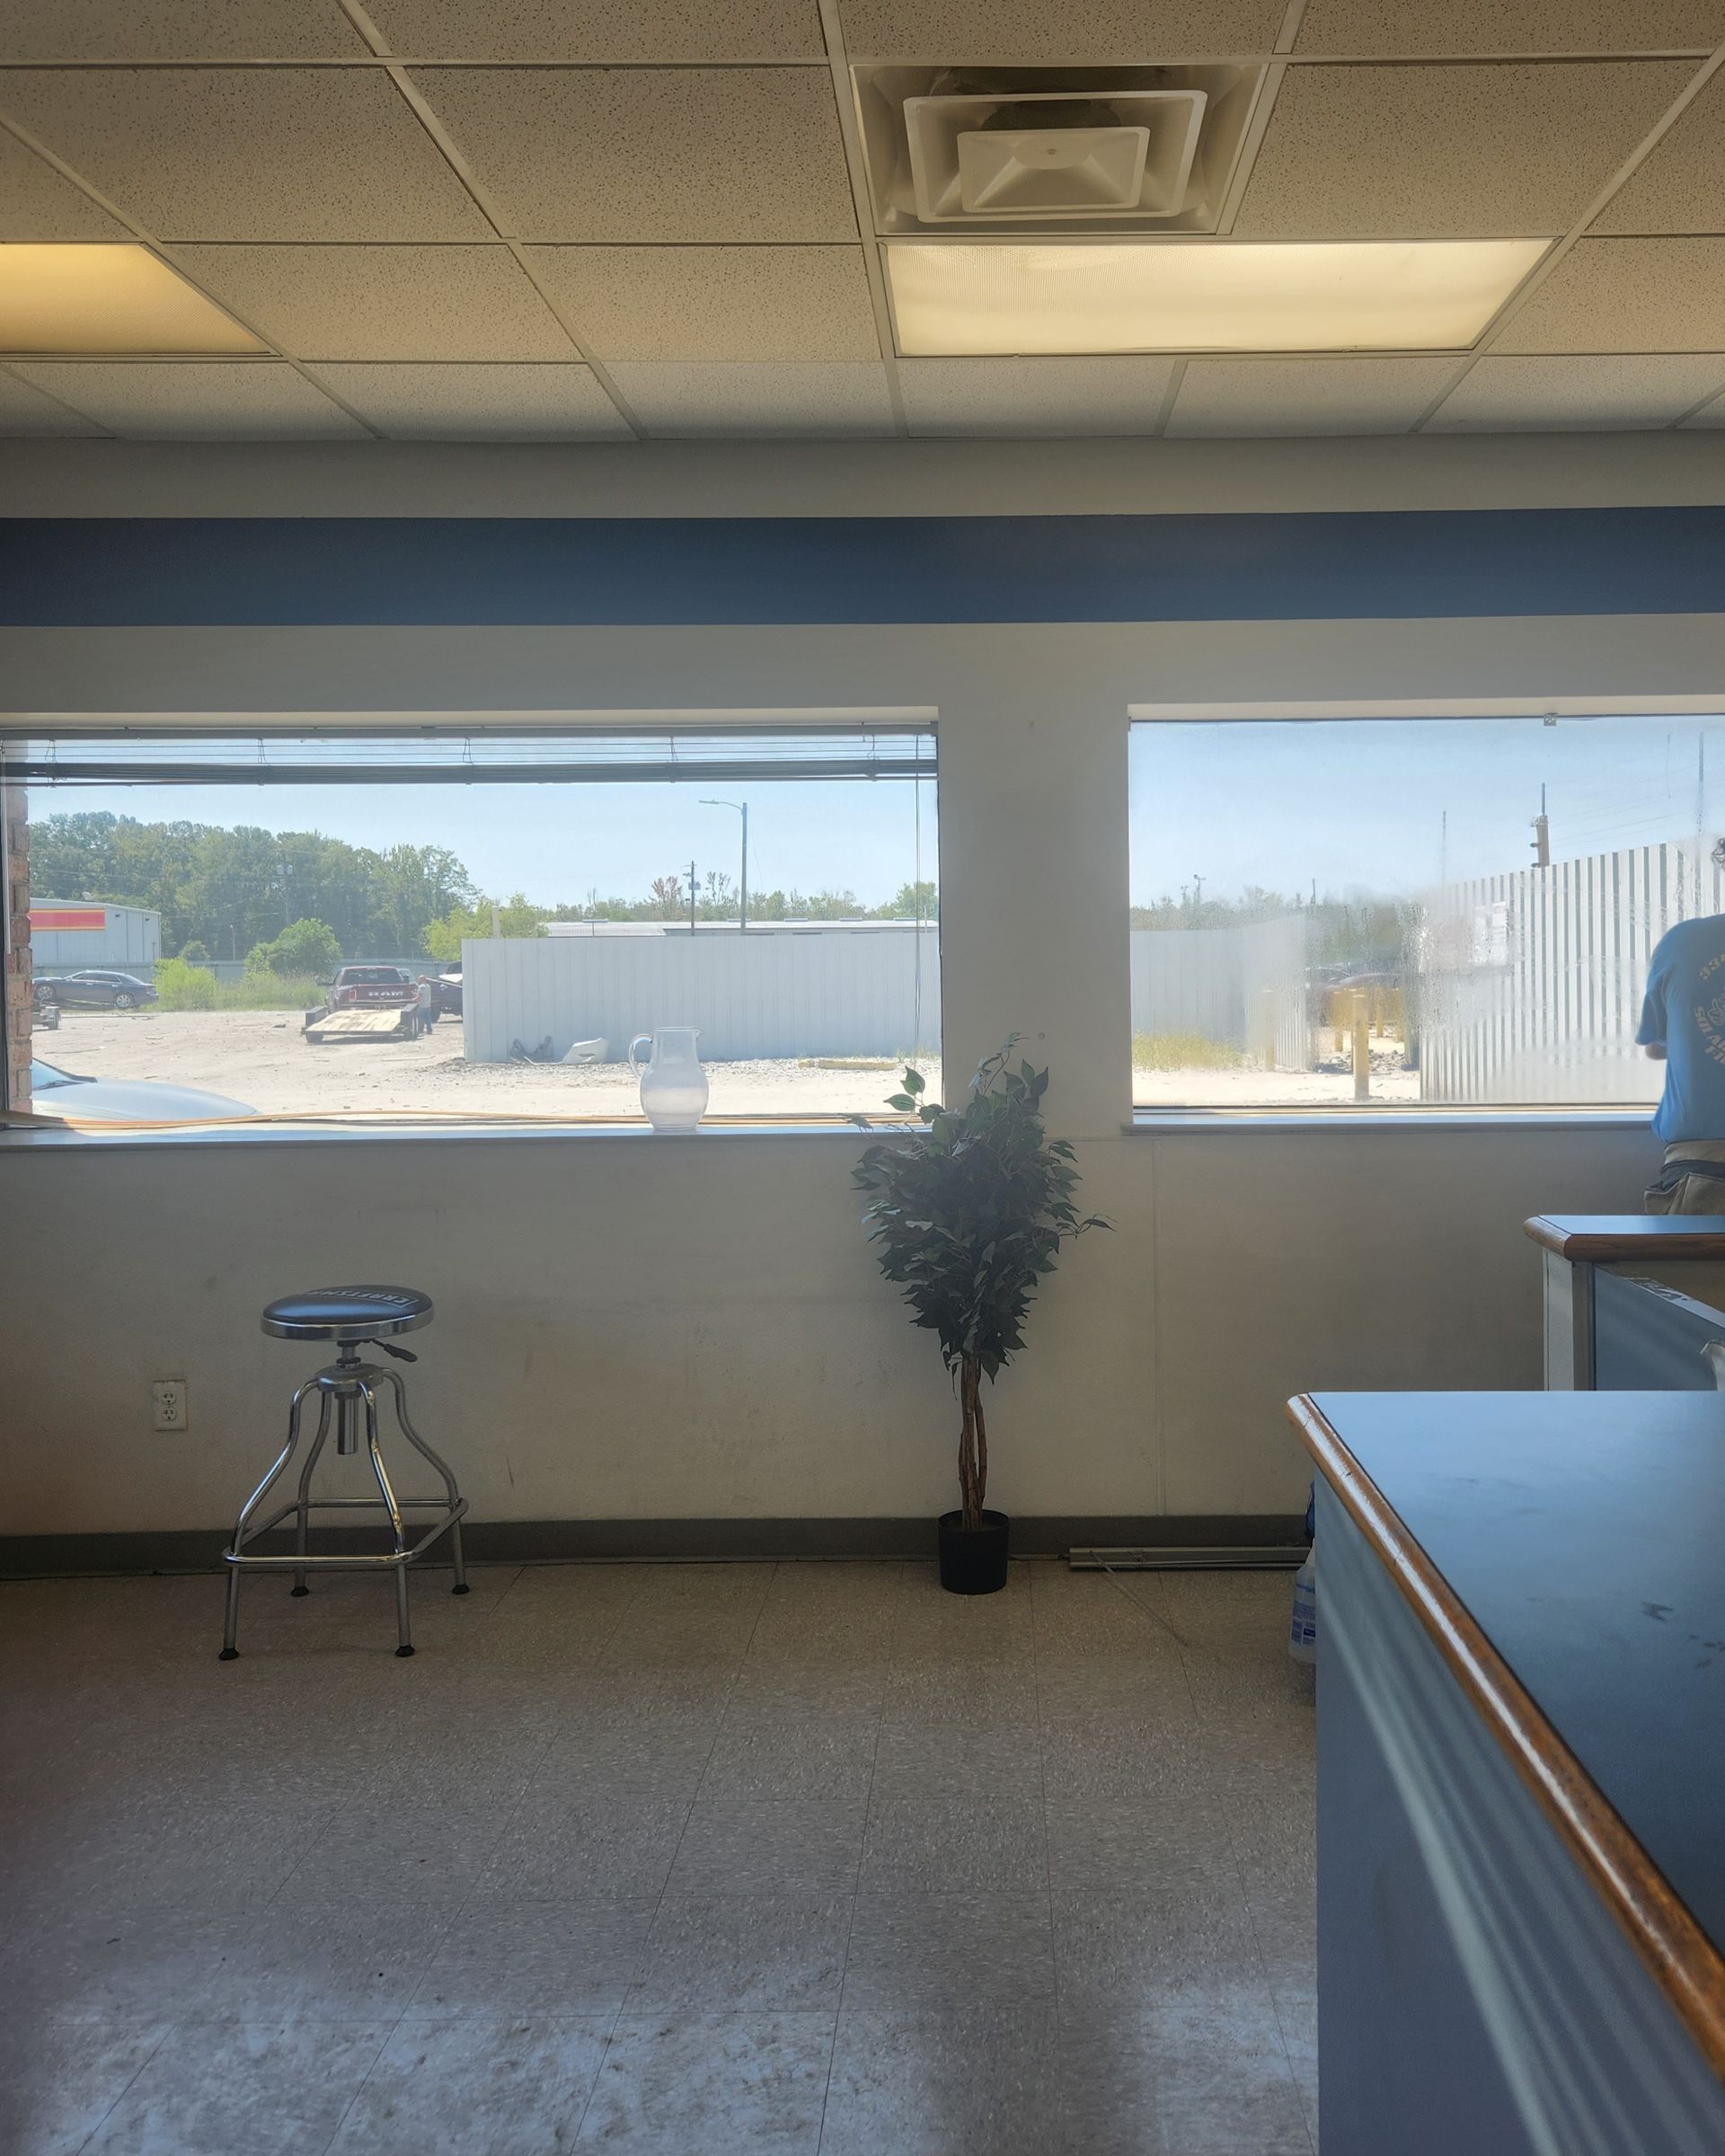 commercial tinting service - Bright Sun limited the intended purpose of this office space before SPF Storefront Tint. Montgomery, AL